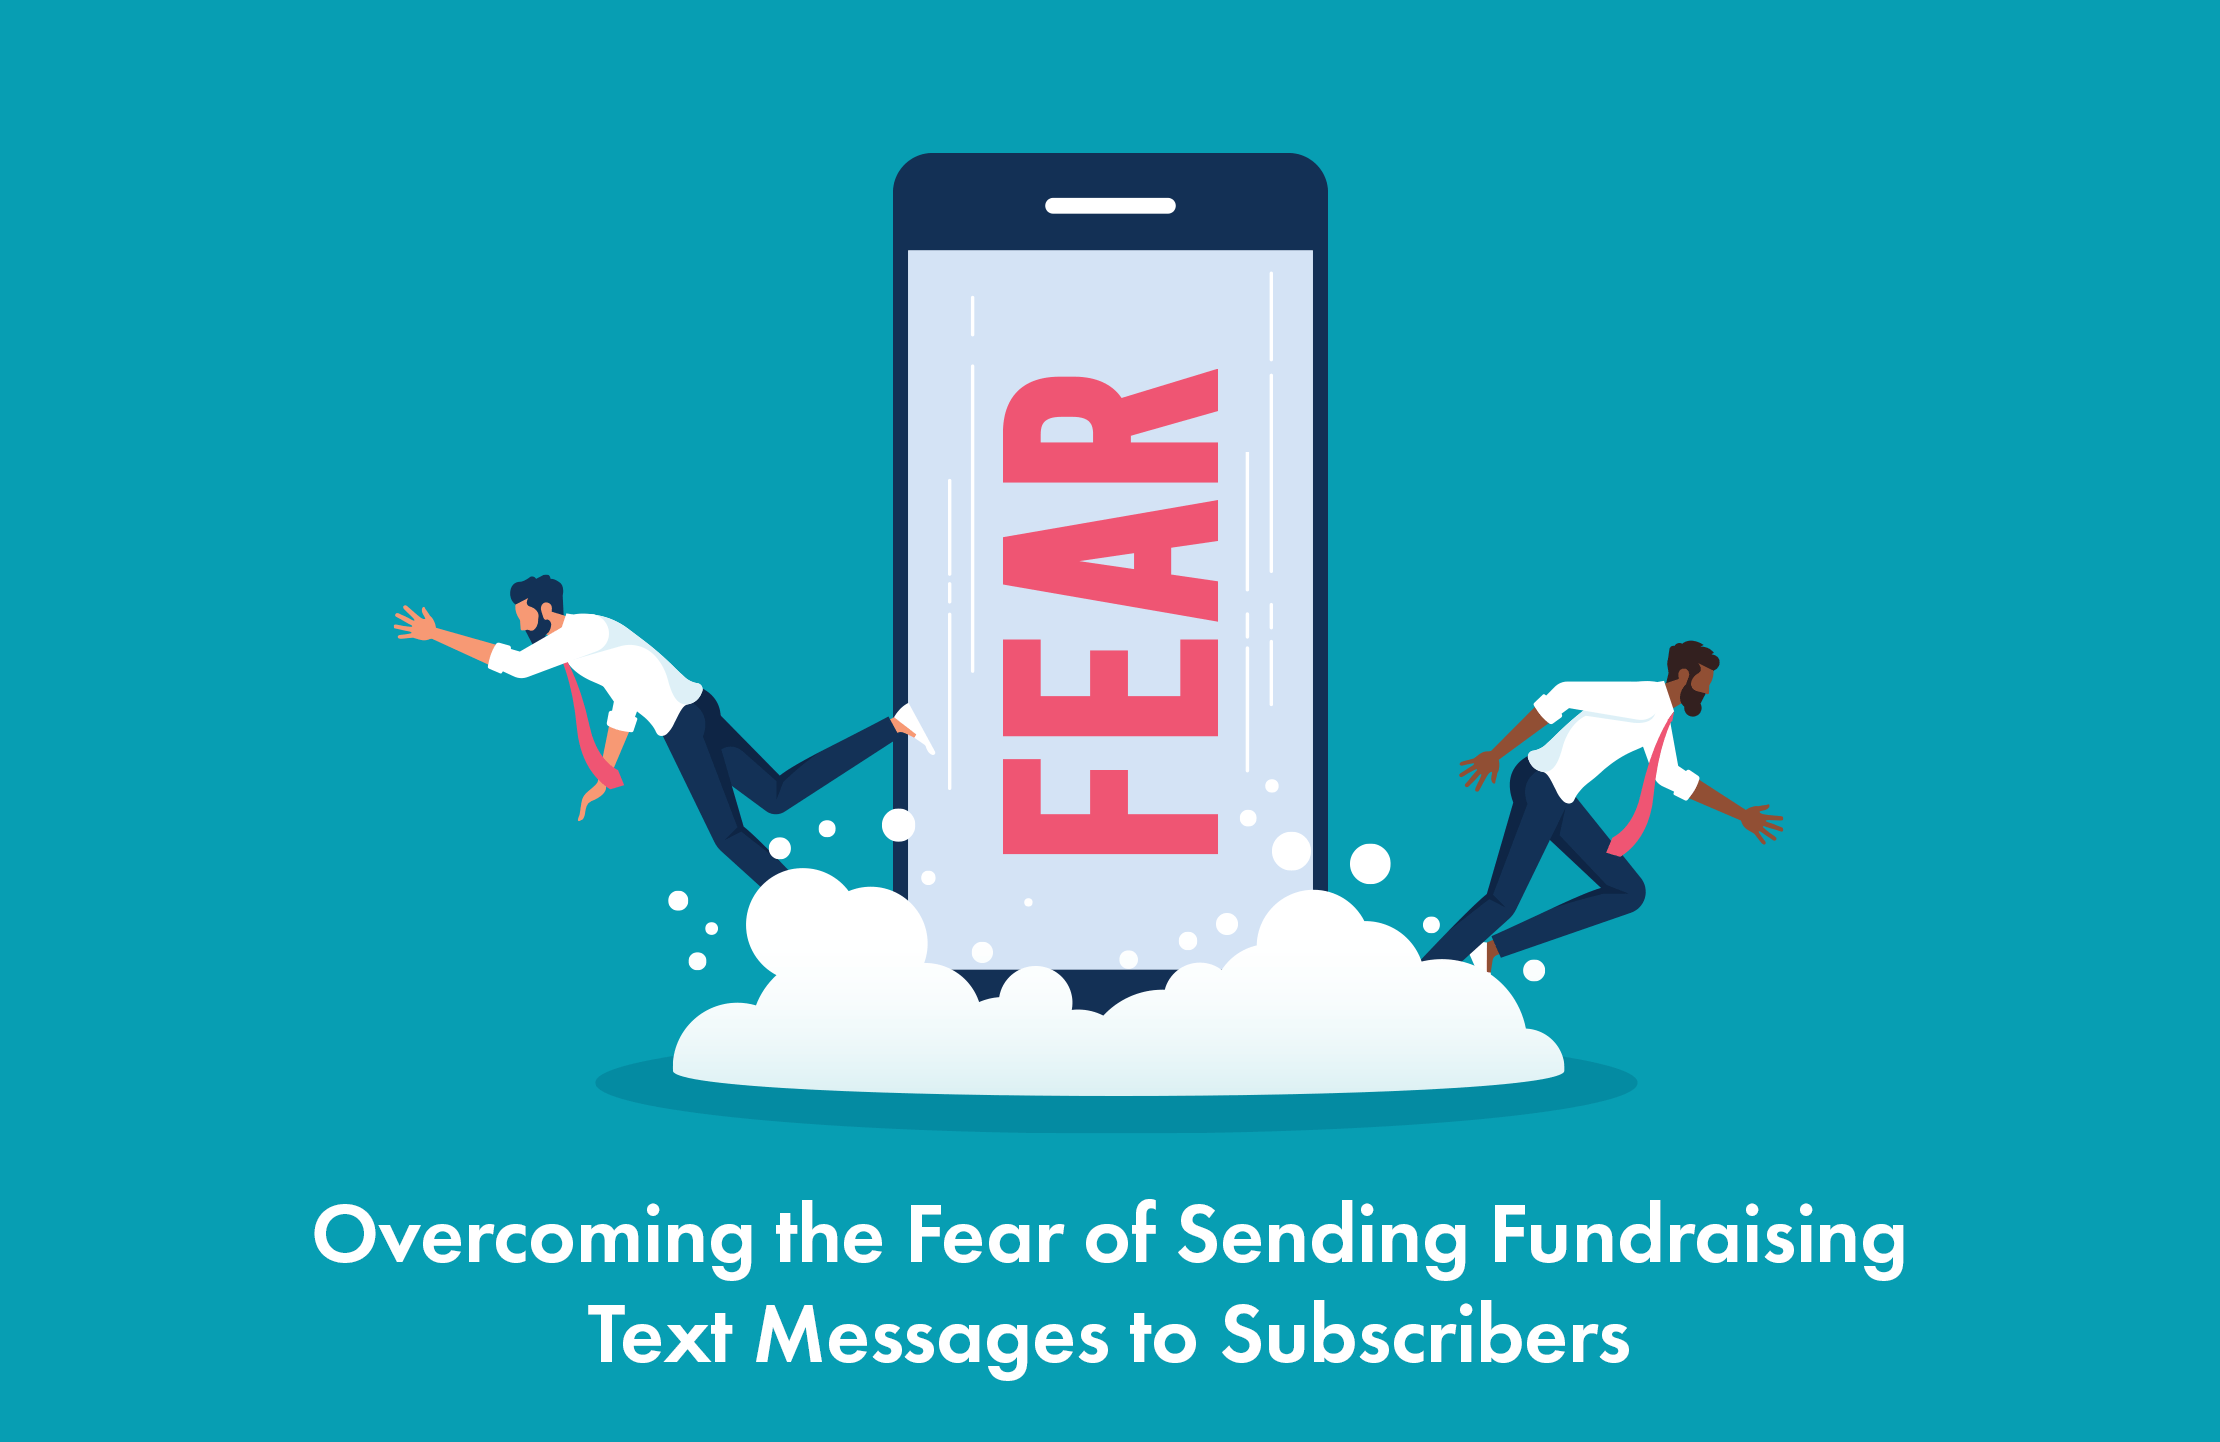 Overcoming the Fear of Sending Fundraising Text Messages to Subscribers